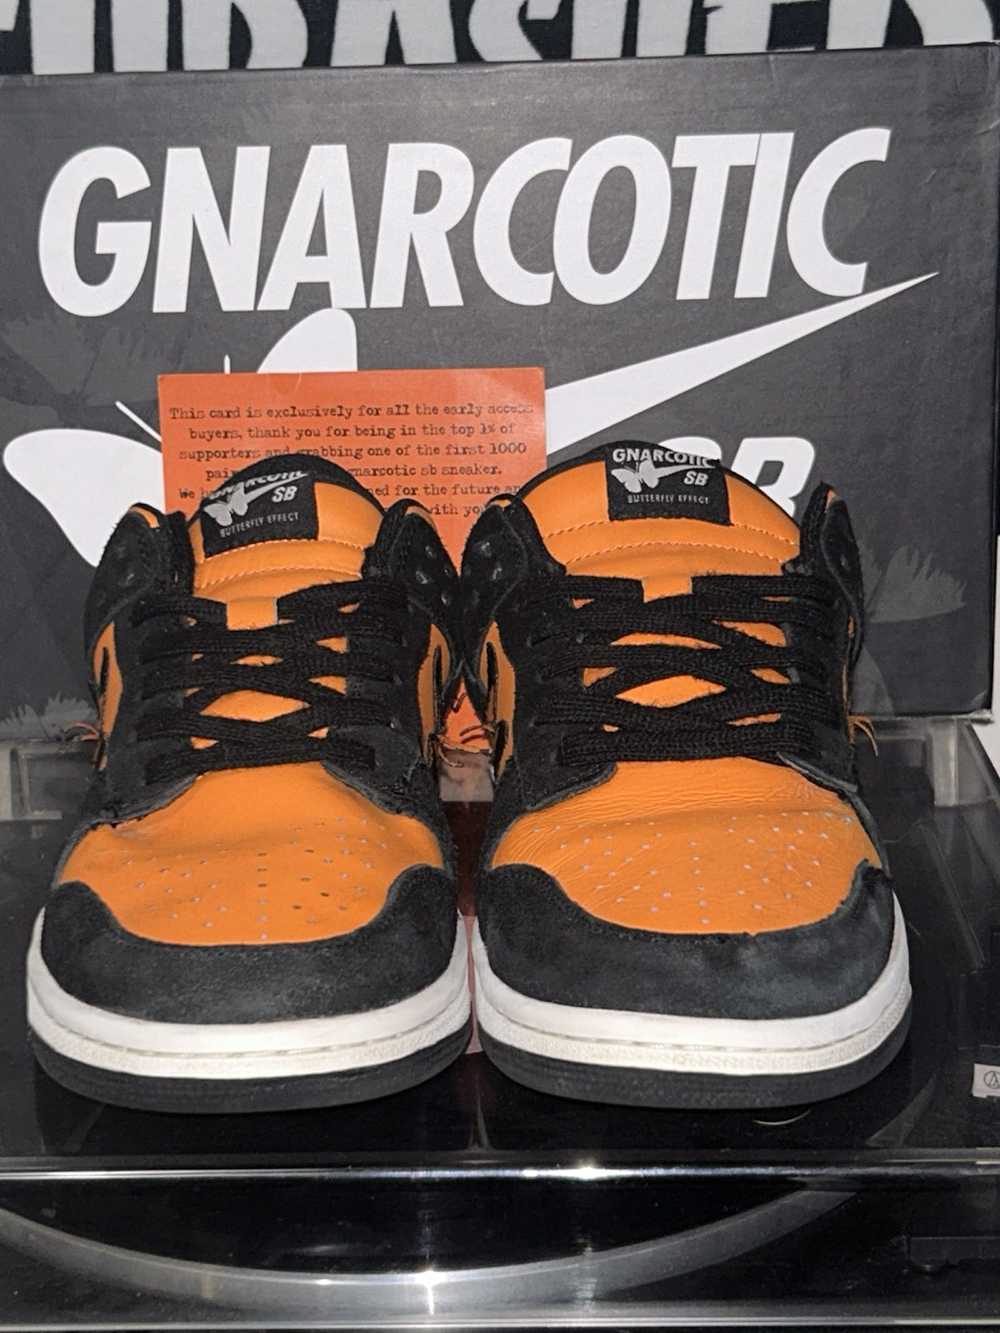 Gnarcotic gnarcotic sb sneakers - image 2